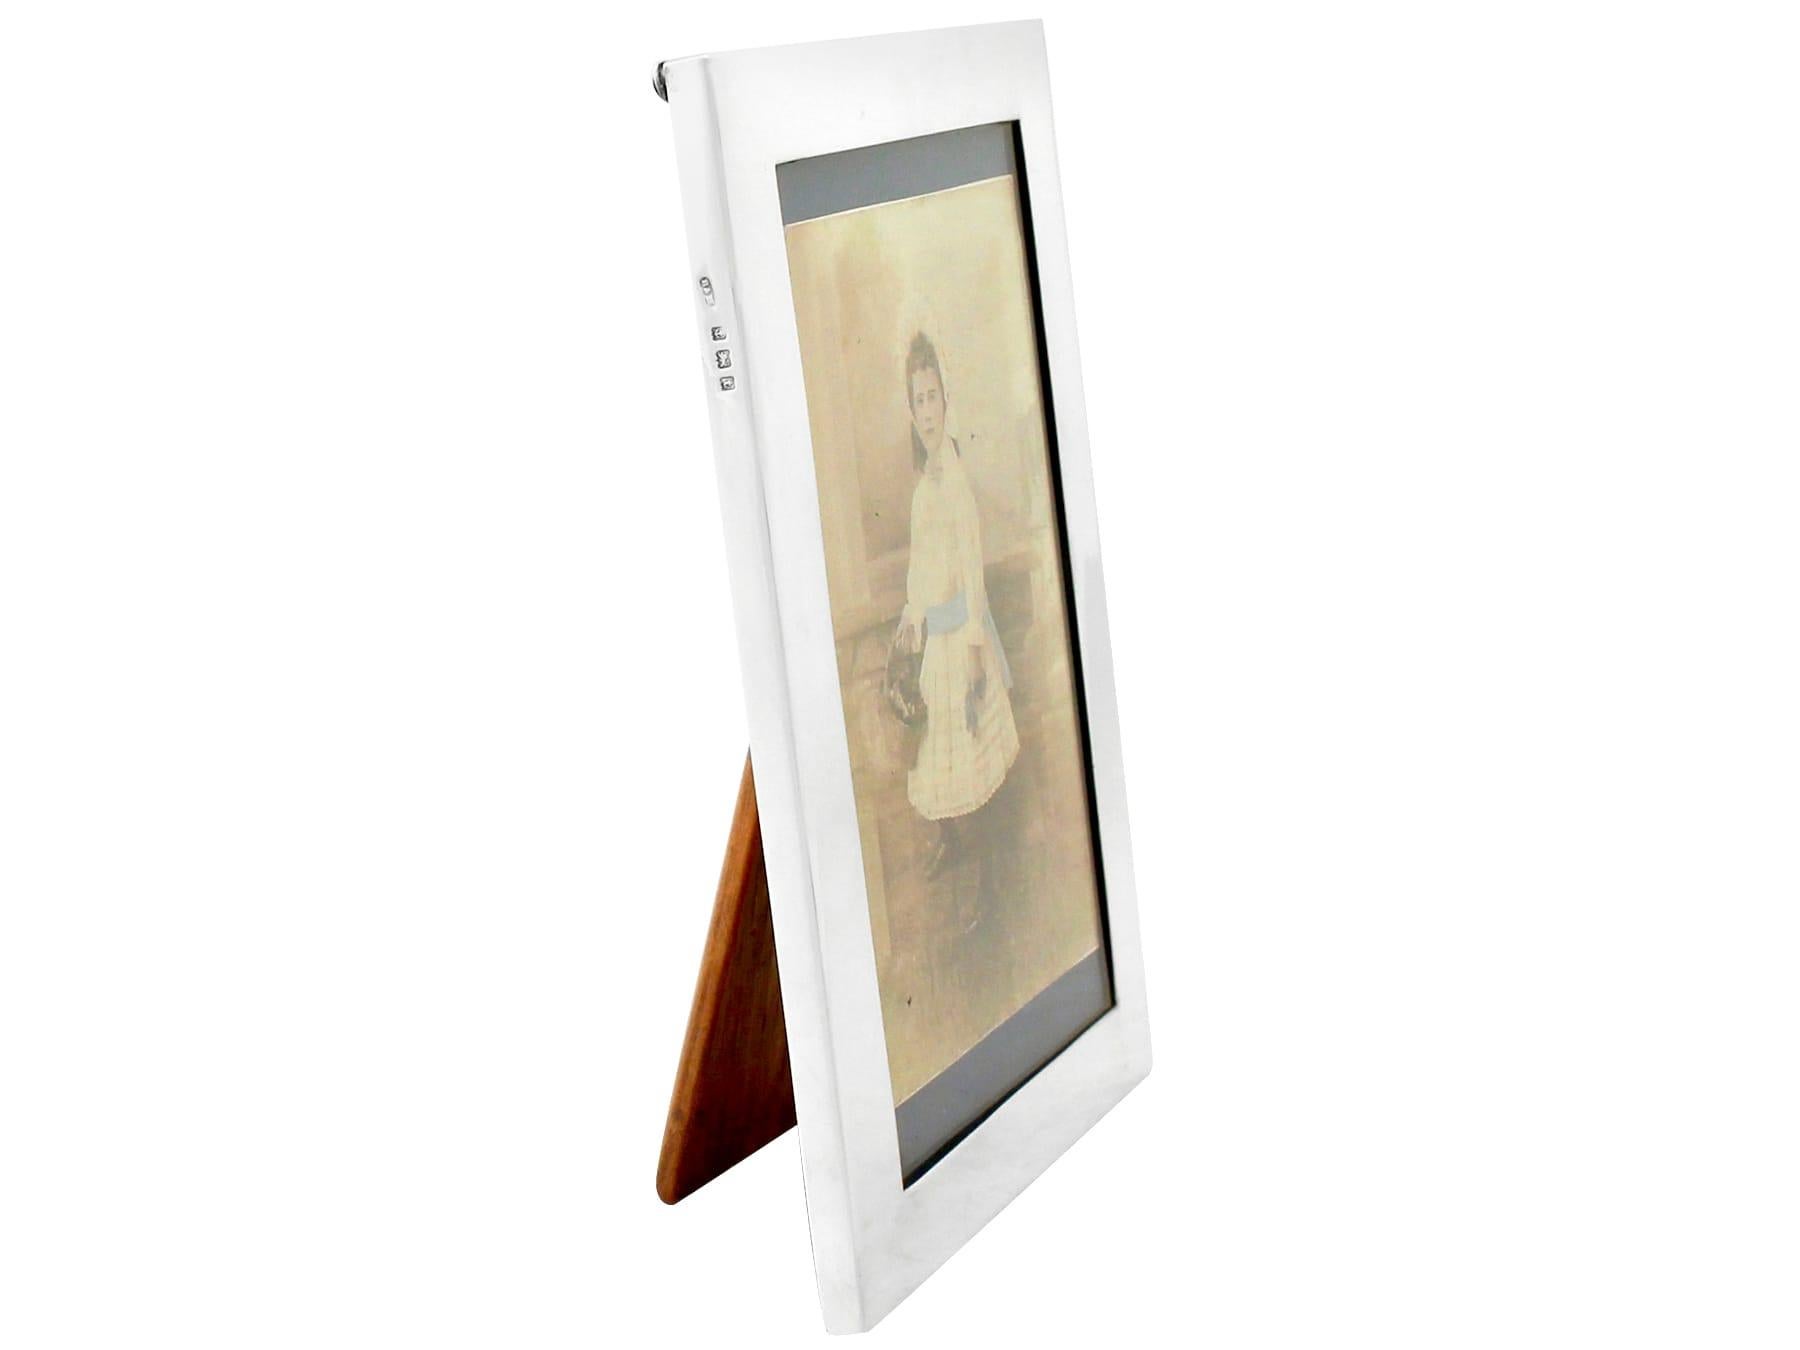 A fine and impressive antique George V English sterling silver photograph frame an addition to our collection of ornamental silverware.

This fine antique George V sterling silver photo frame has a plain rectangular form.

The surface of this